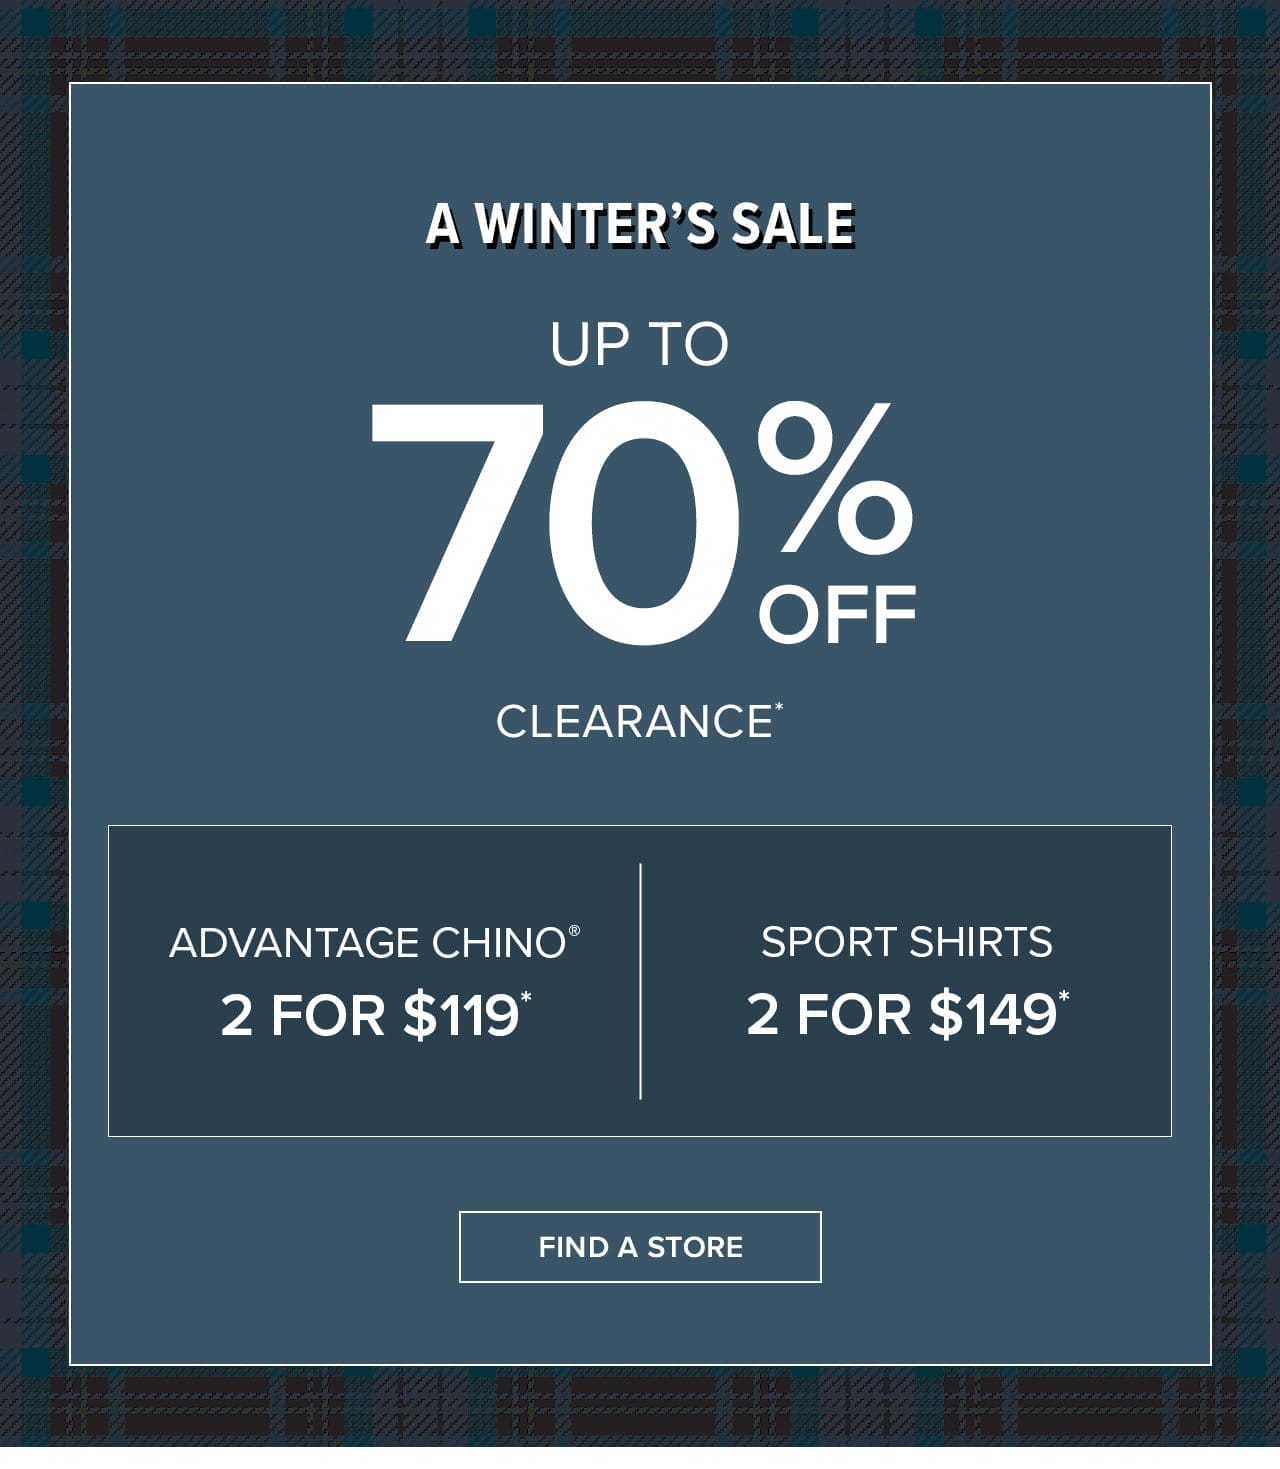  A WINTER'S SALE UP TO 70% OFF CLEARANCE* Advantage Chino® 2 for \\$119* Sport Shirts 2 for \\$149*